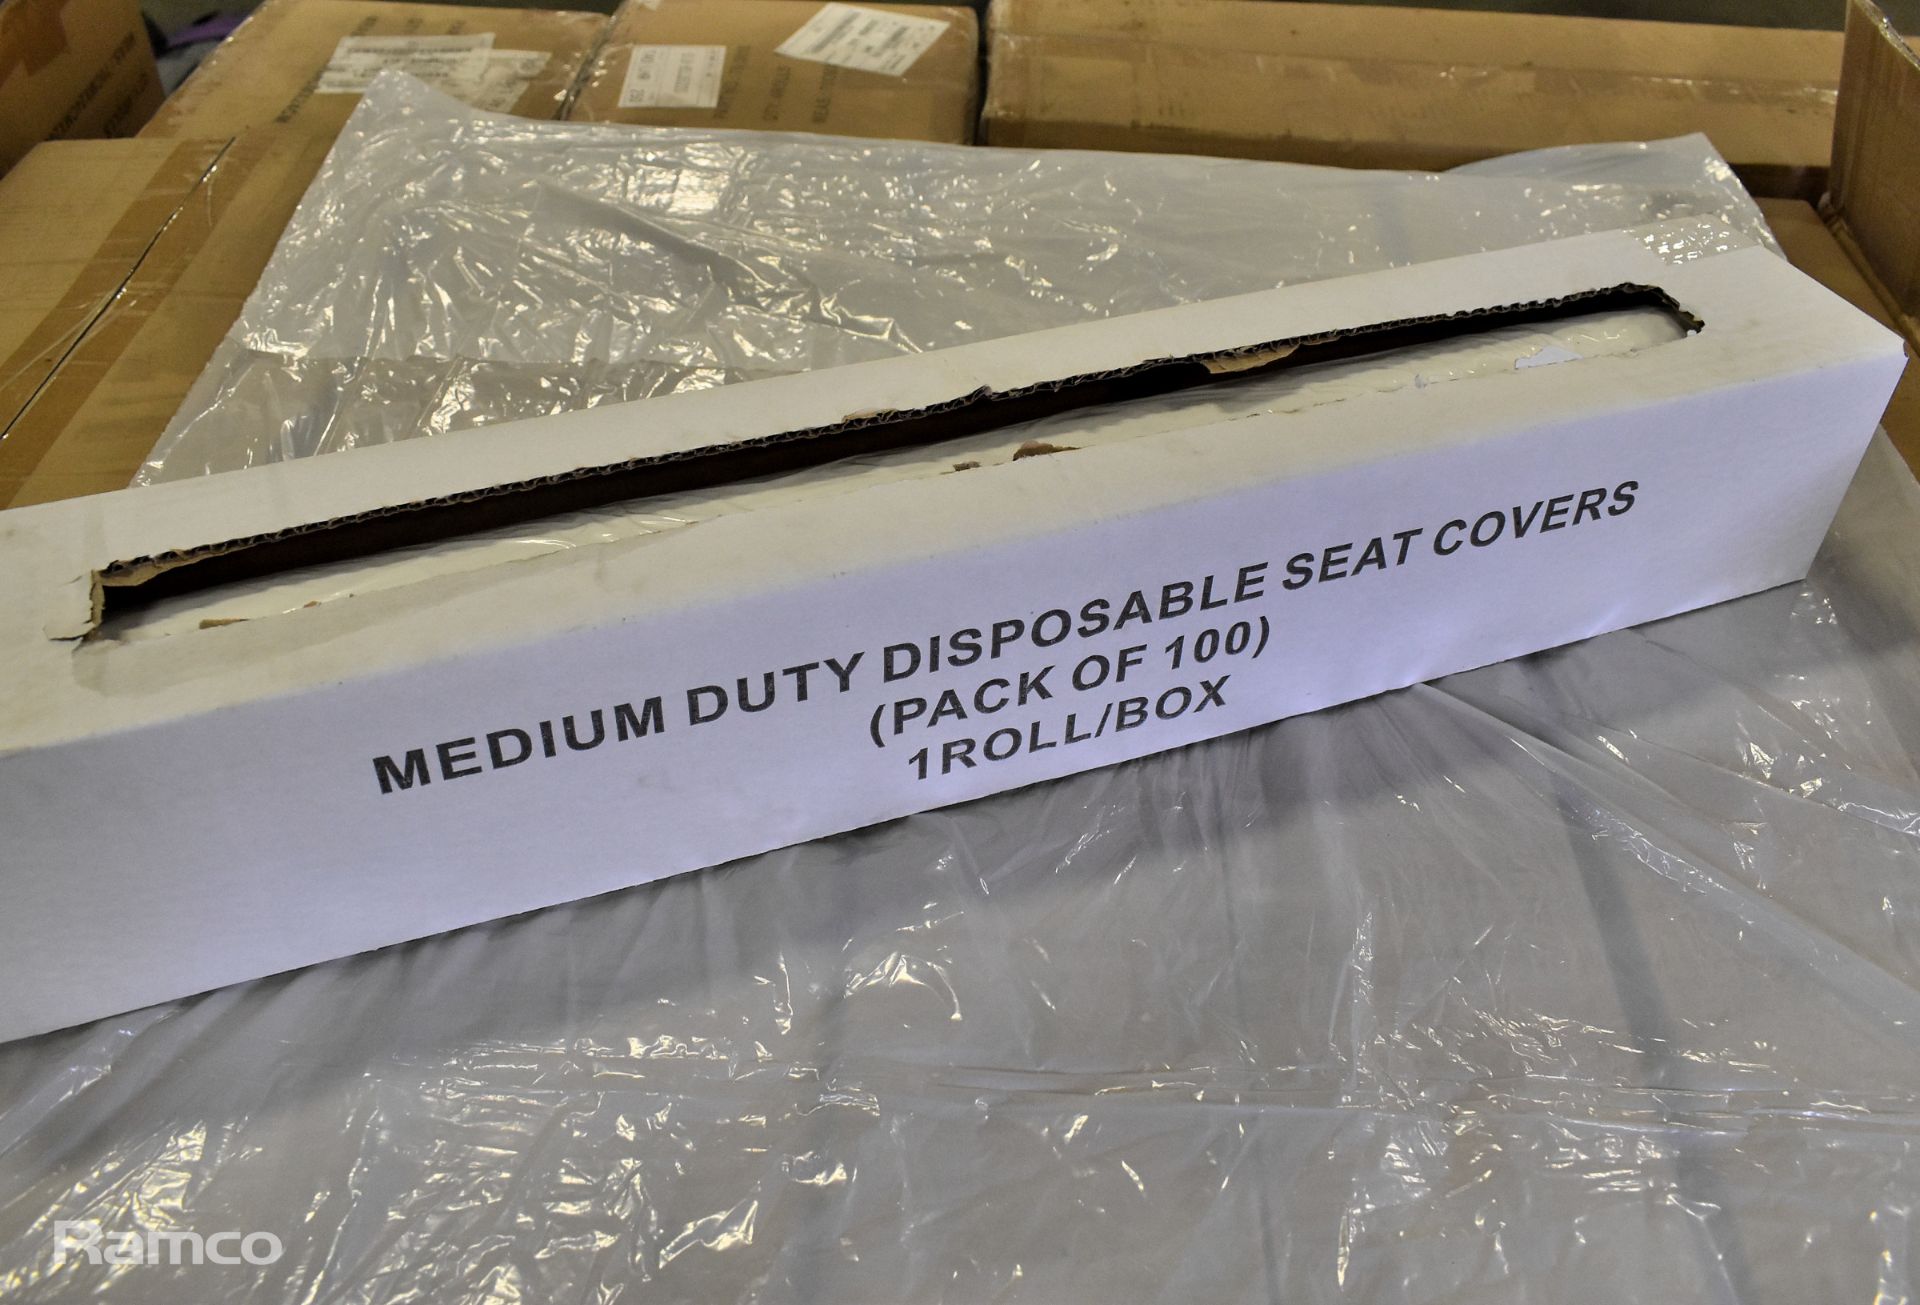 20x boxes of Medium duty disposable seat covers (100 per roll) - 4 rolls per carton - Image 2 of 5